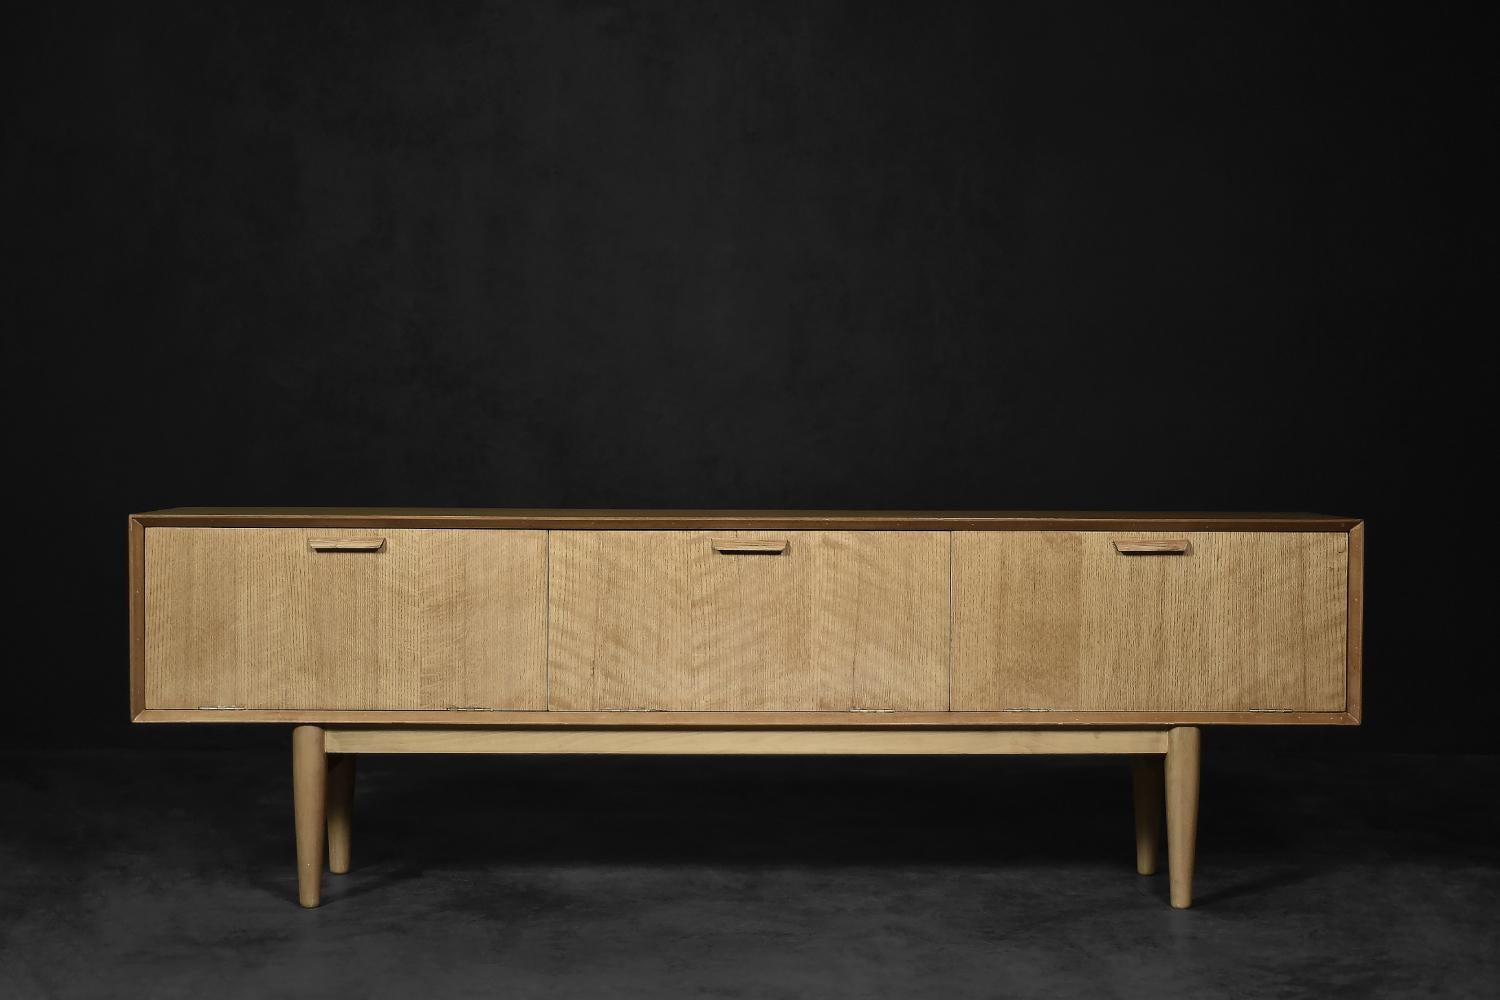 This classic sideboard was made in Denmark during the 1970s. It was finished with oak wood, highly valued in the northern regions of Europe, with regular and clean grain and a natural, straw color. The wood was additionally waxed, which emphasized